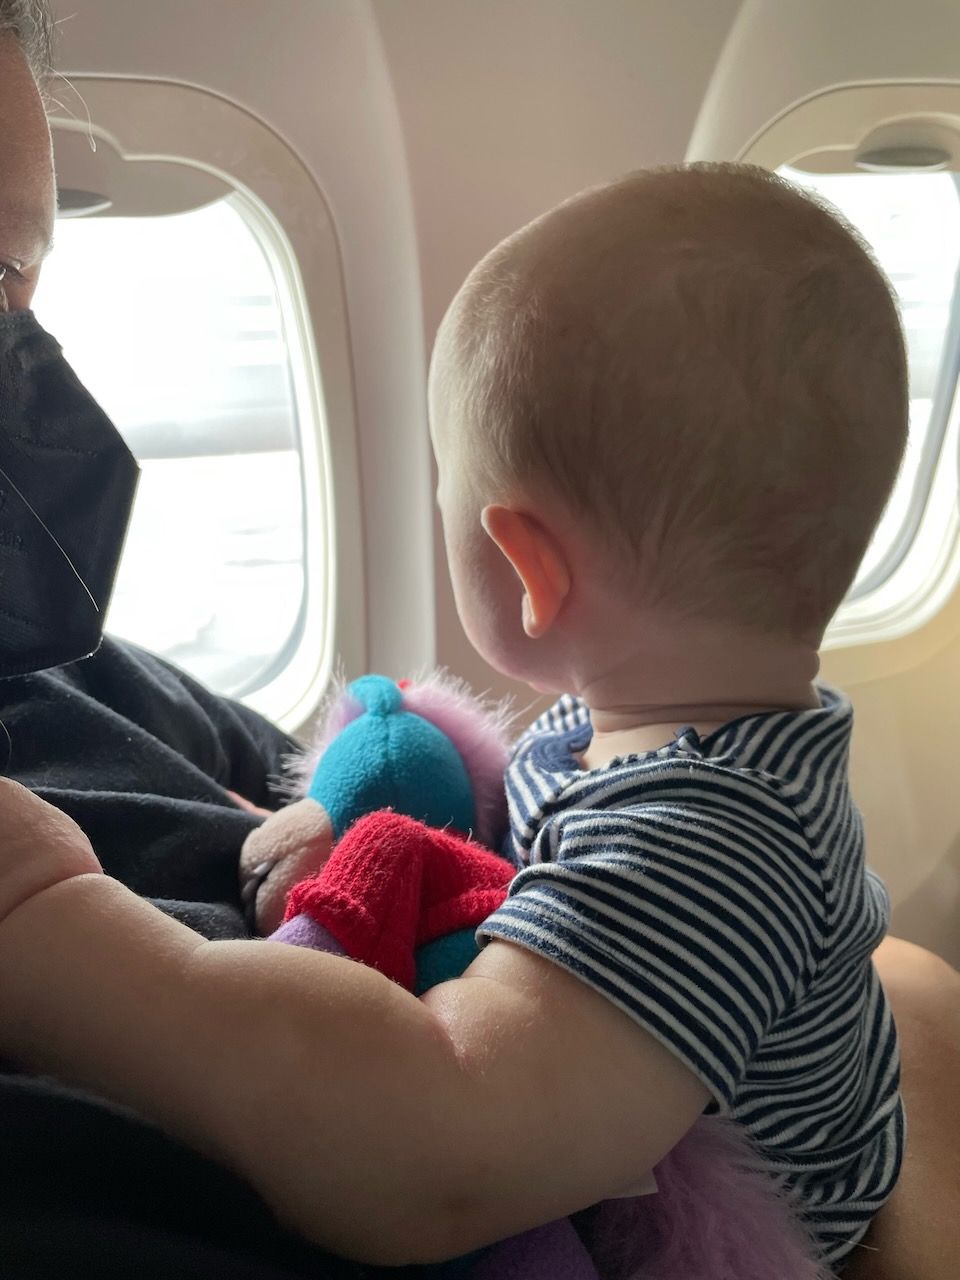 A baby looks out an airplane window